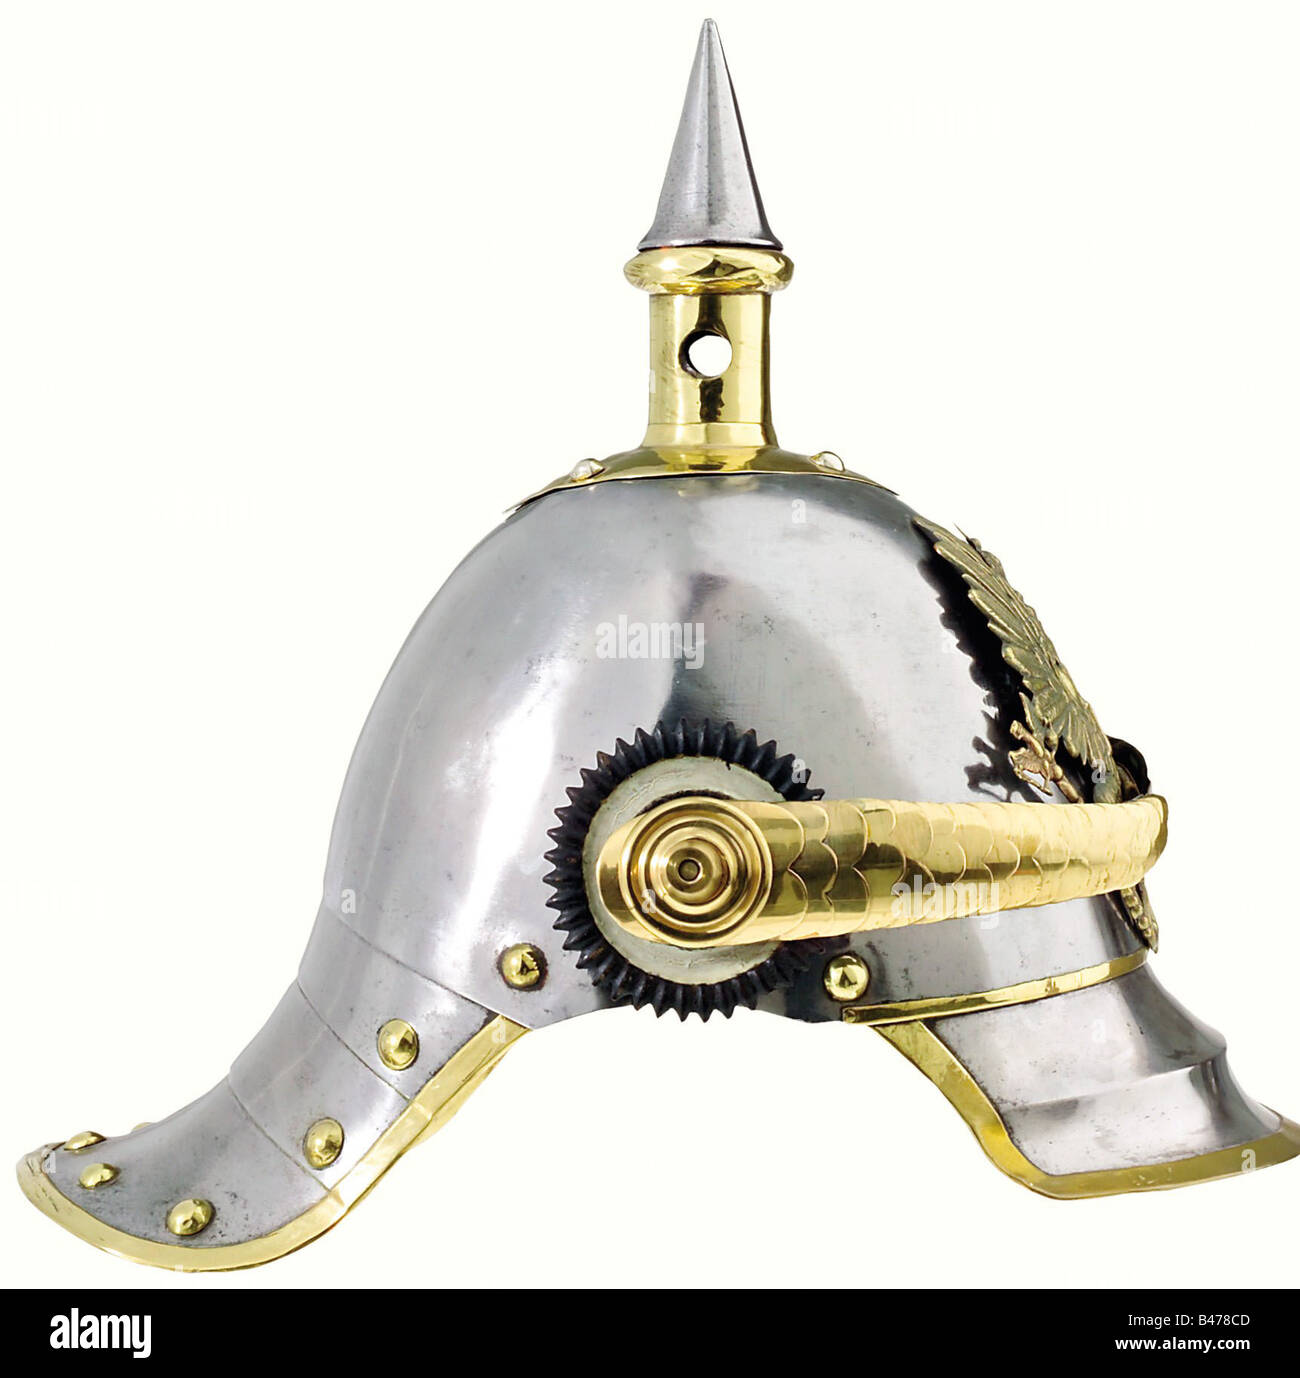 Prussia: A helmet for troopers, of cuirassiers of the line, 1853 pattern. Brass-rimmed steel skull, with slight rust scarring. Some former attachment holes have been filled in by soldering. Brass fittings. The plate is of an older pattern. The cambered chinscales (not original) are attached by long replacement stud bolts. Multiple stamp marks are visible below the left rosette. The leather liner of the visor has some flaws, and the lining of the skull is missing. Approx. size 56. historic, historical, 19th century, object, objects, stills, clipping, clippings, , Stock Photo